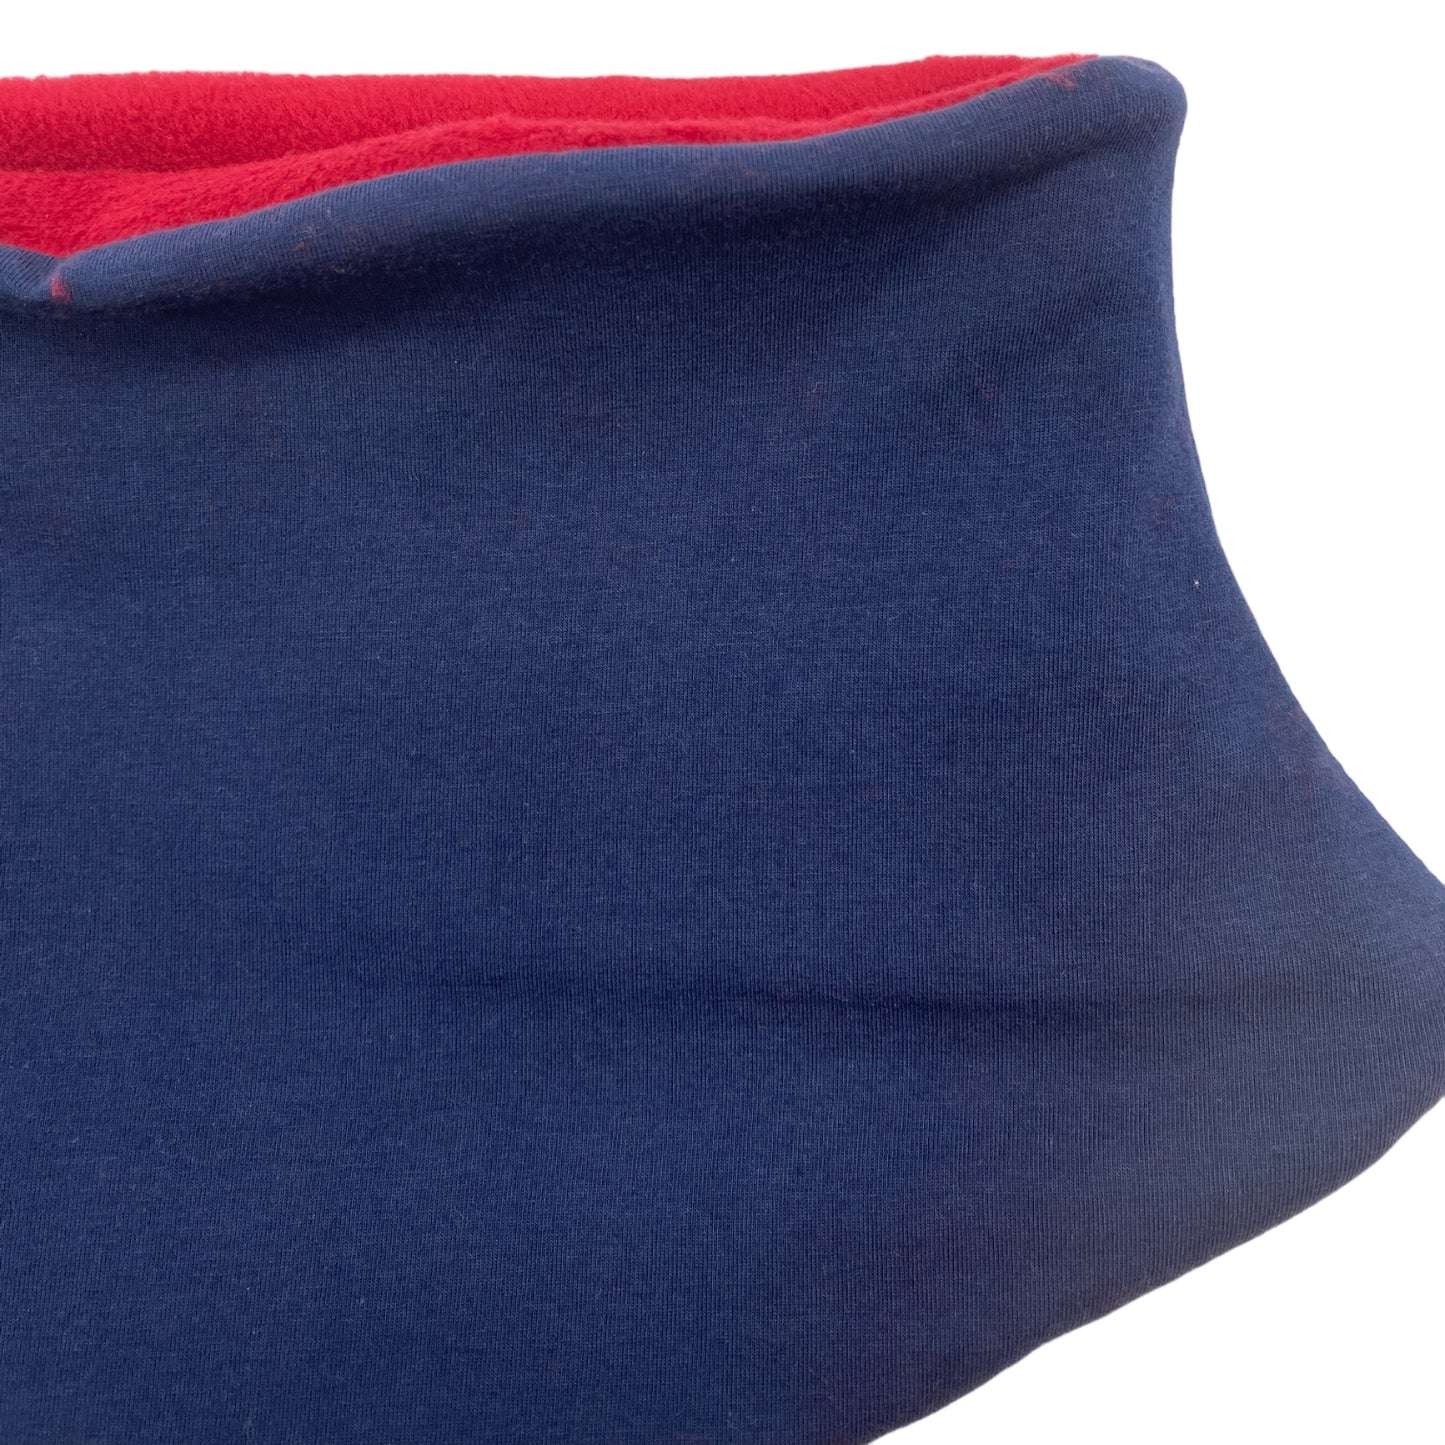 Adult Handmade Neck Warmer Solid Navy Blue (multiple liners available)